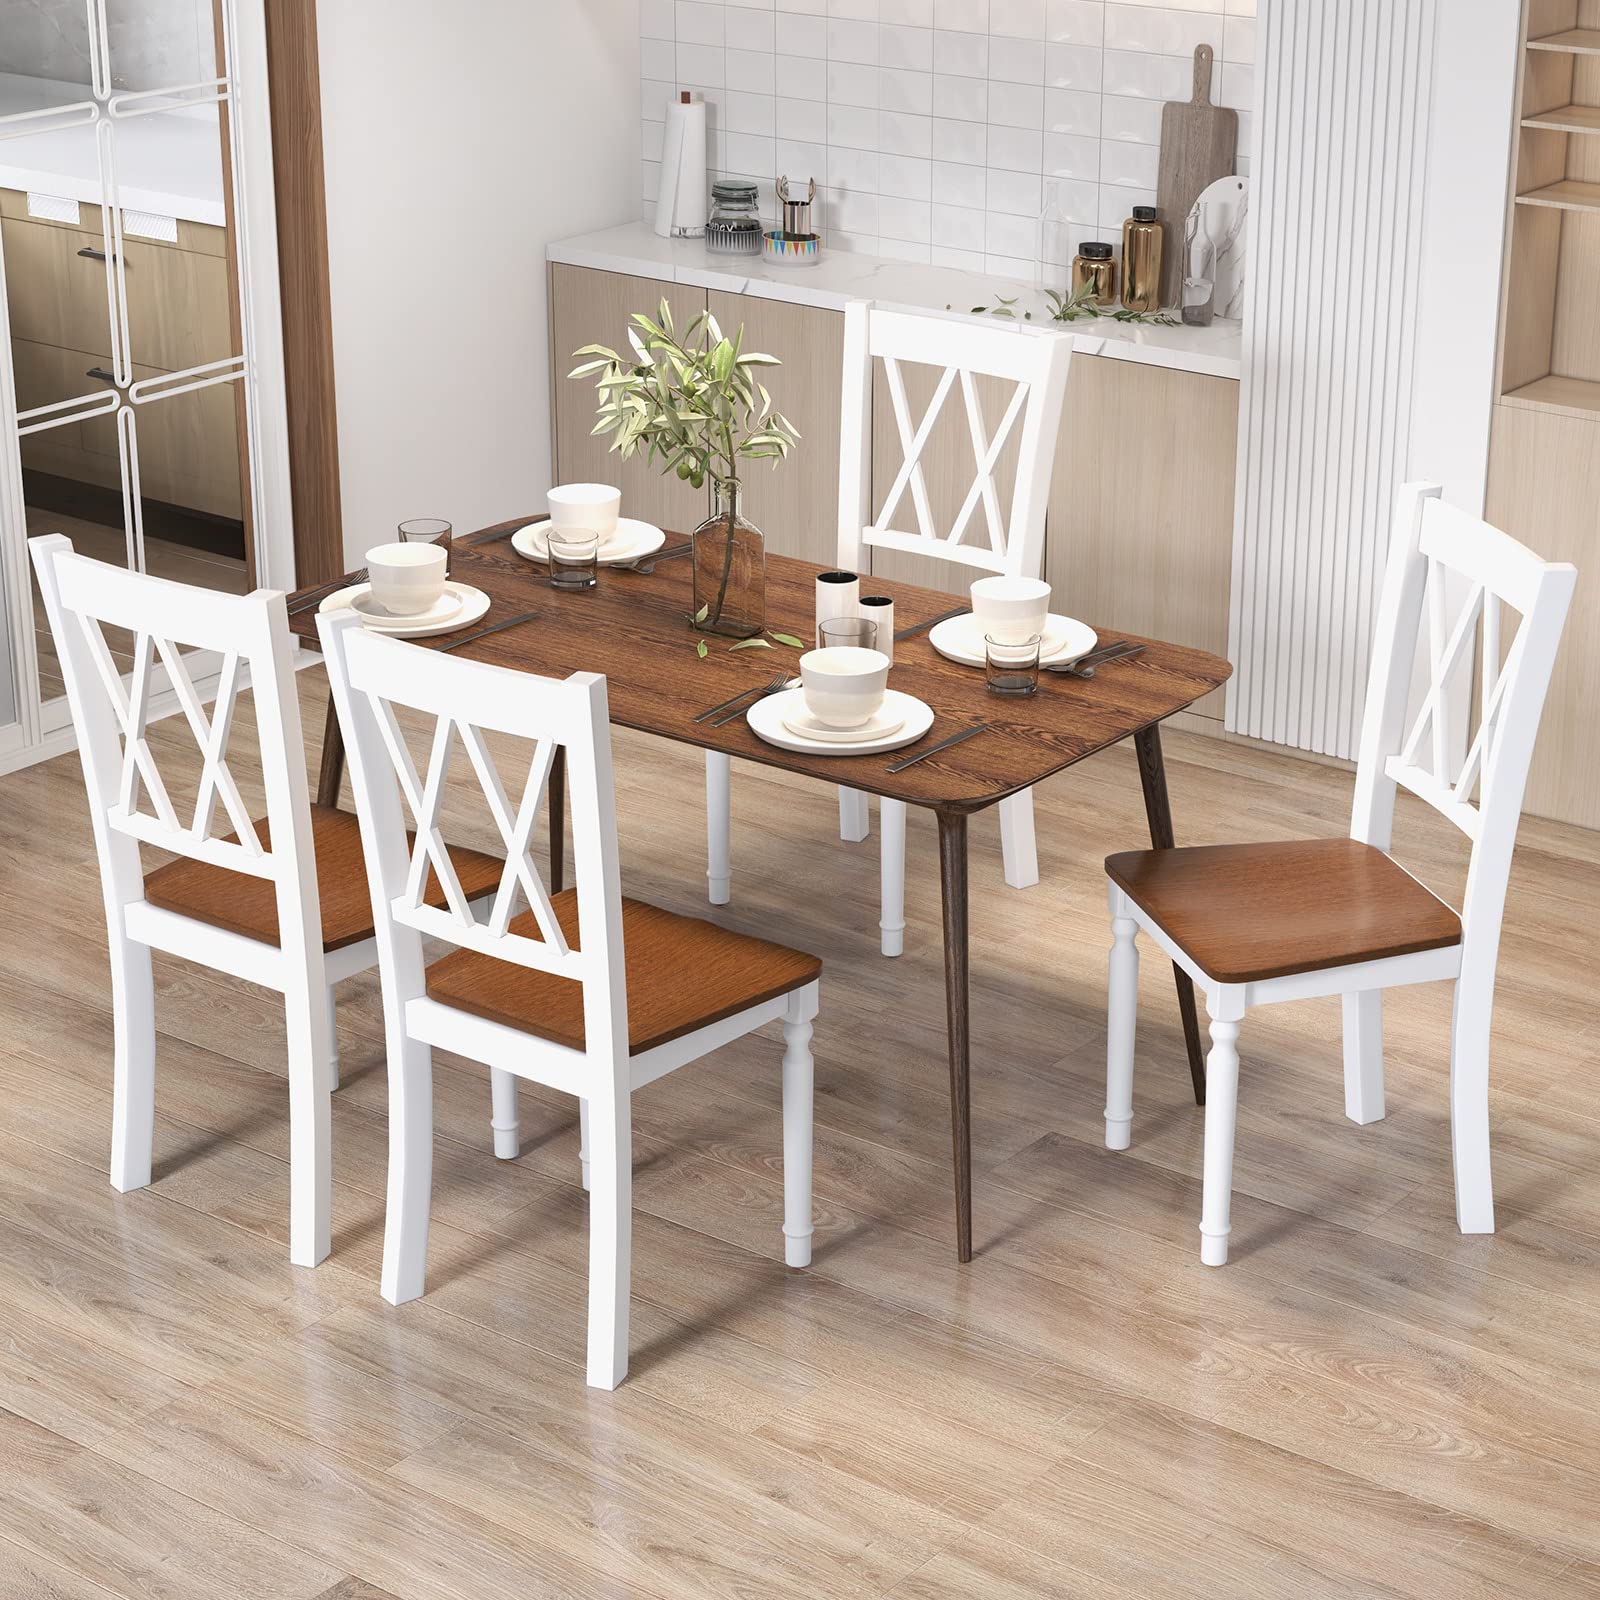 Giantex Dining Room Chairs Set of 2 White, Wooden Farmhouse Kitchen Chairs with Rubber Wood Seat